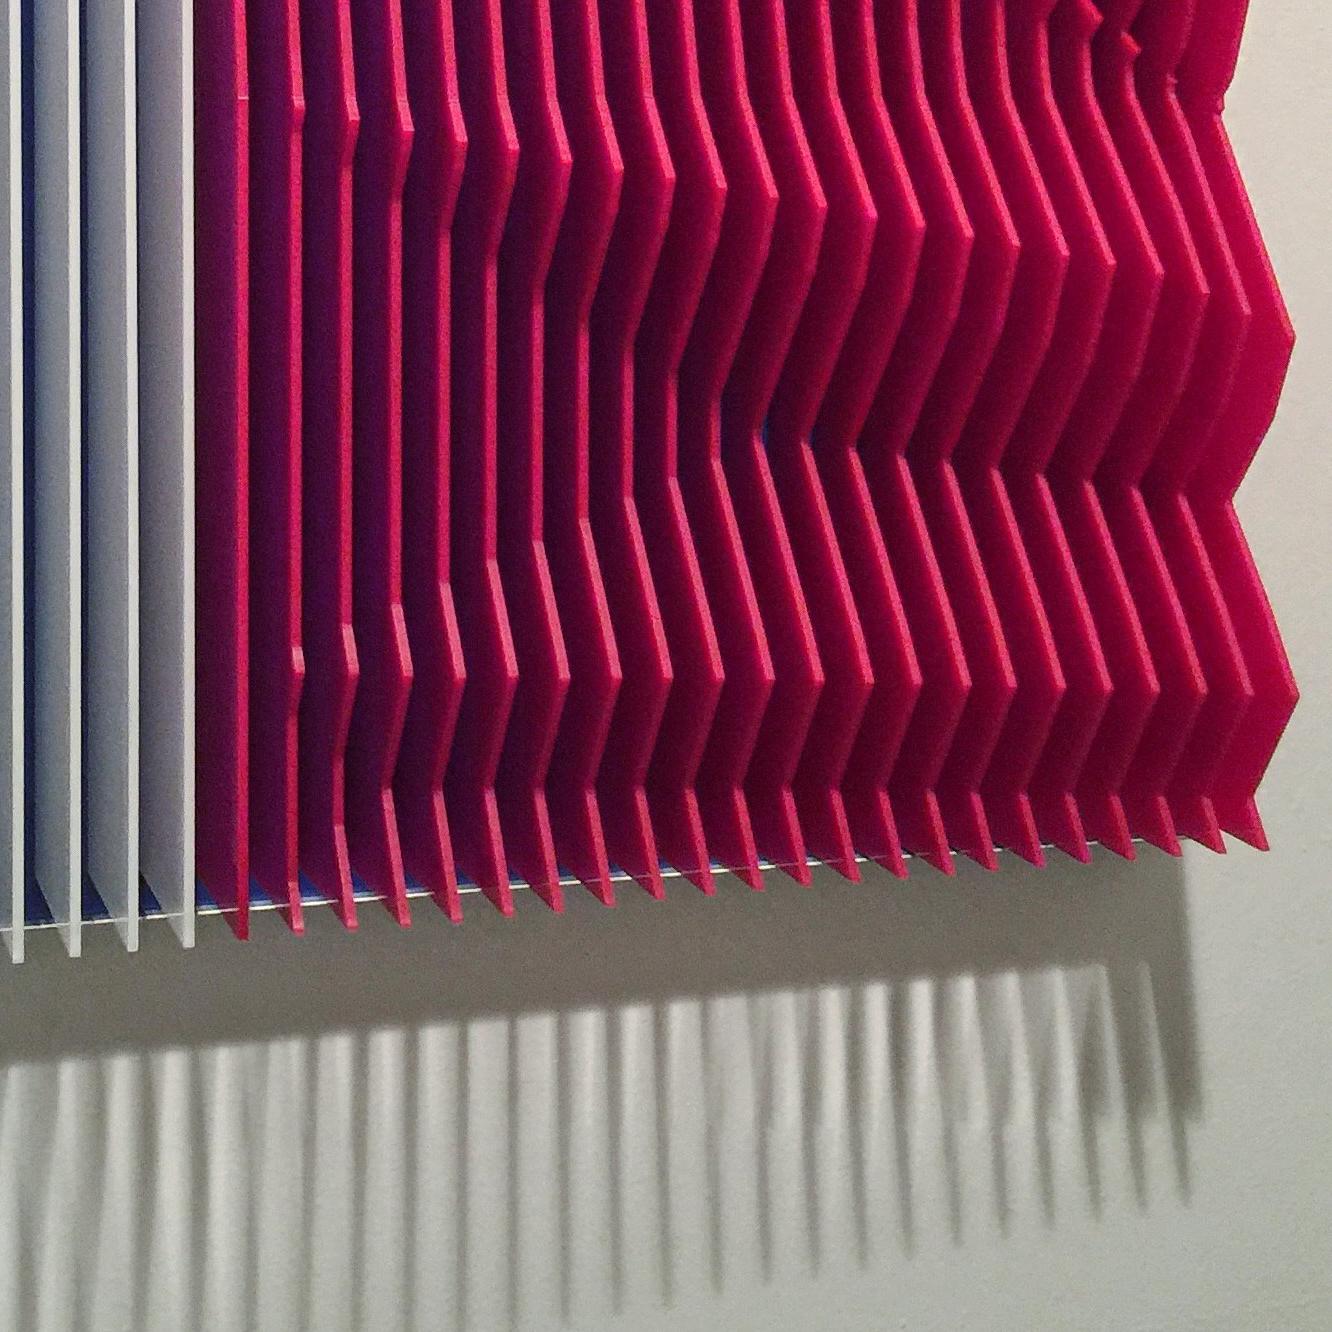 kinetic wall sculptures